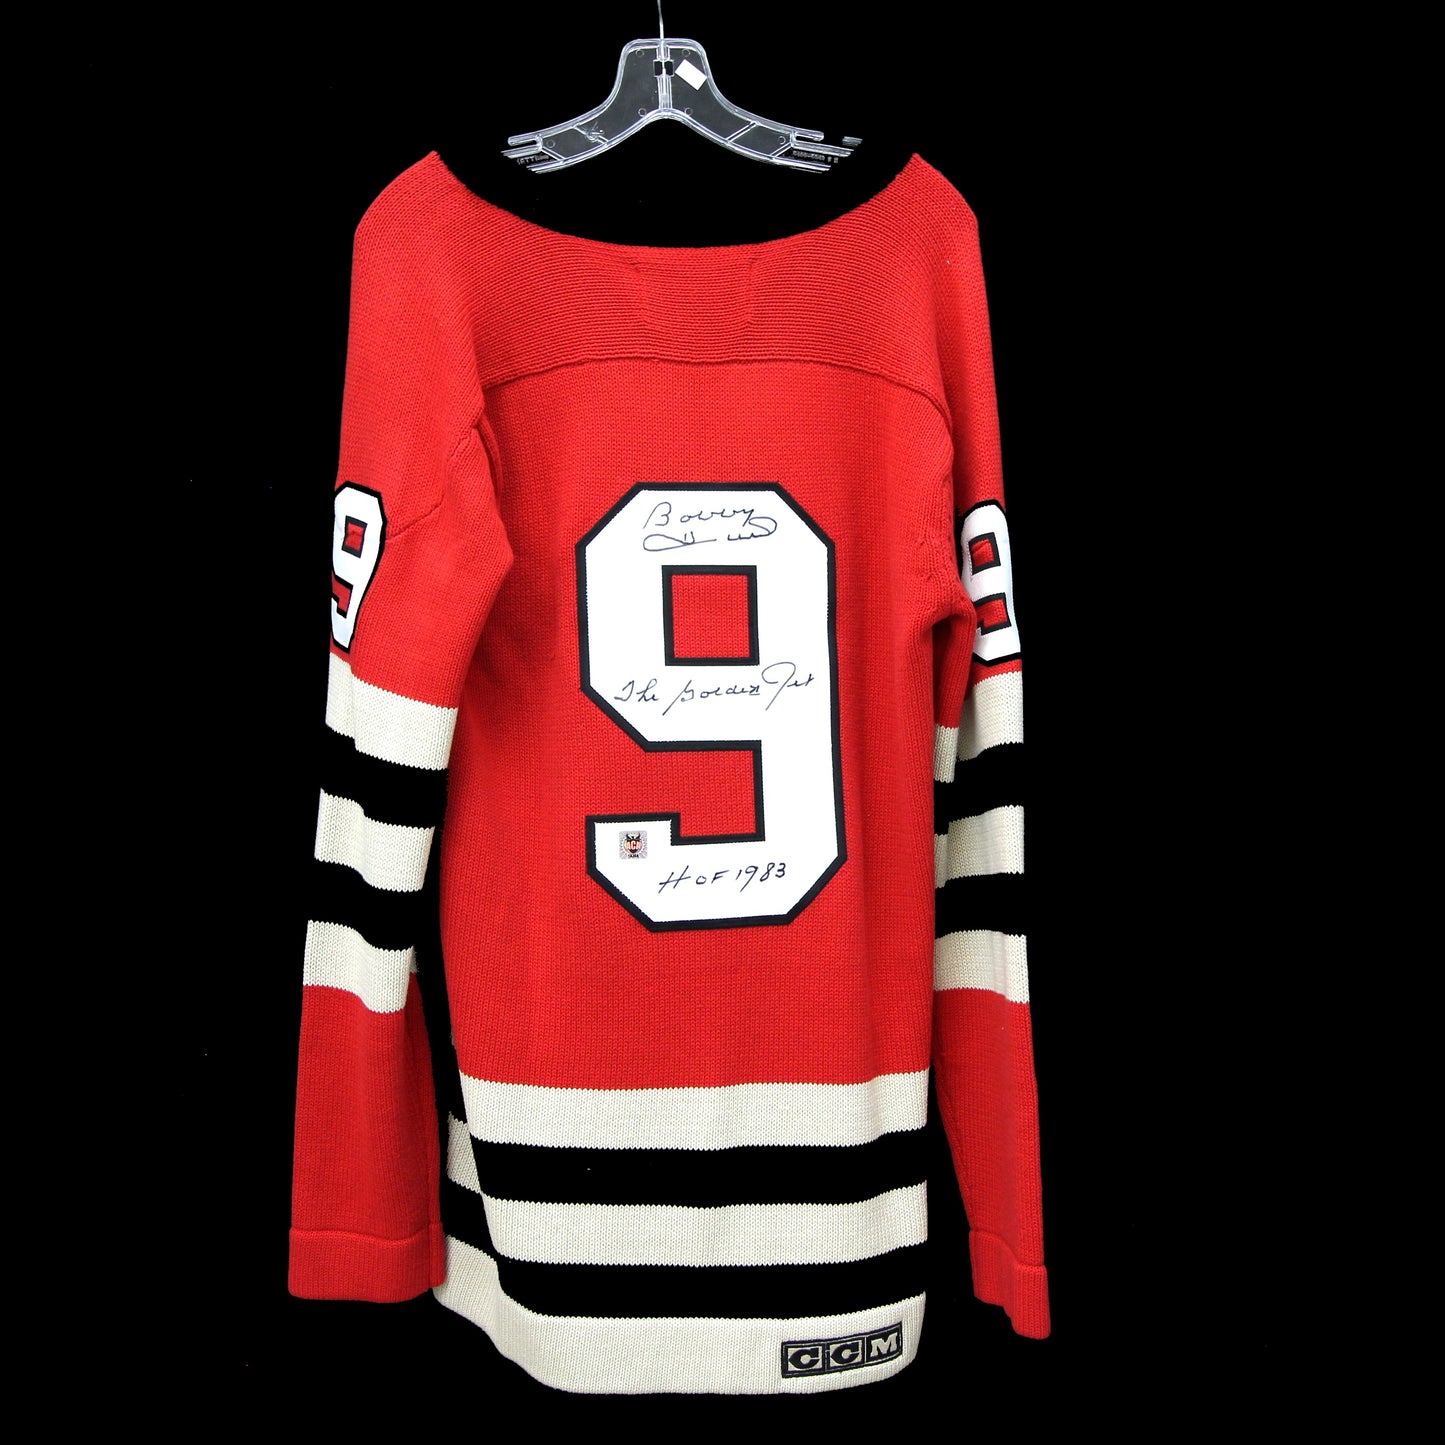 Bobby Hull - Black Hawks - Autographed Jersey / Chandail autographié